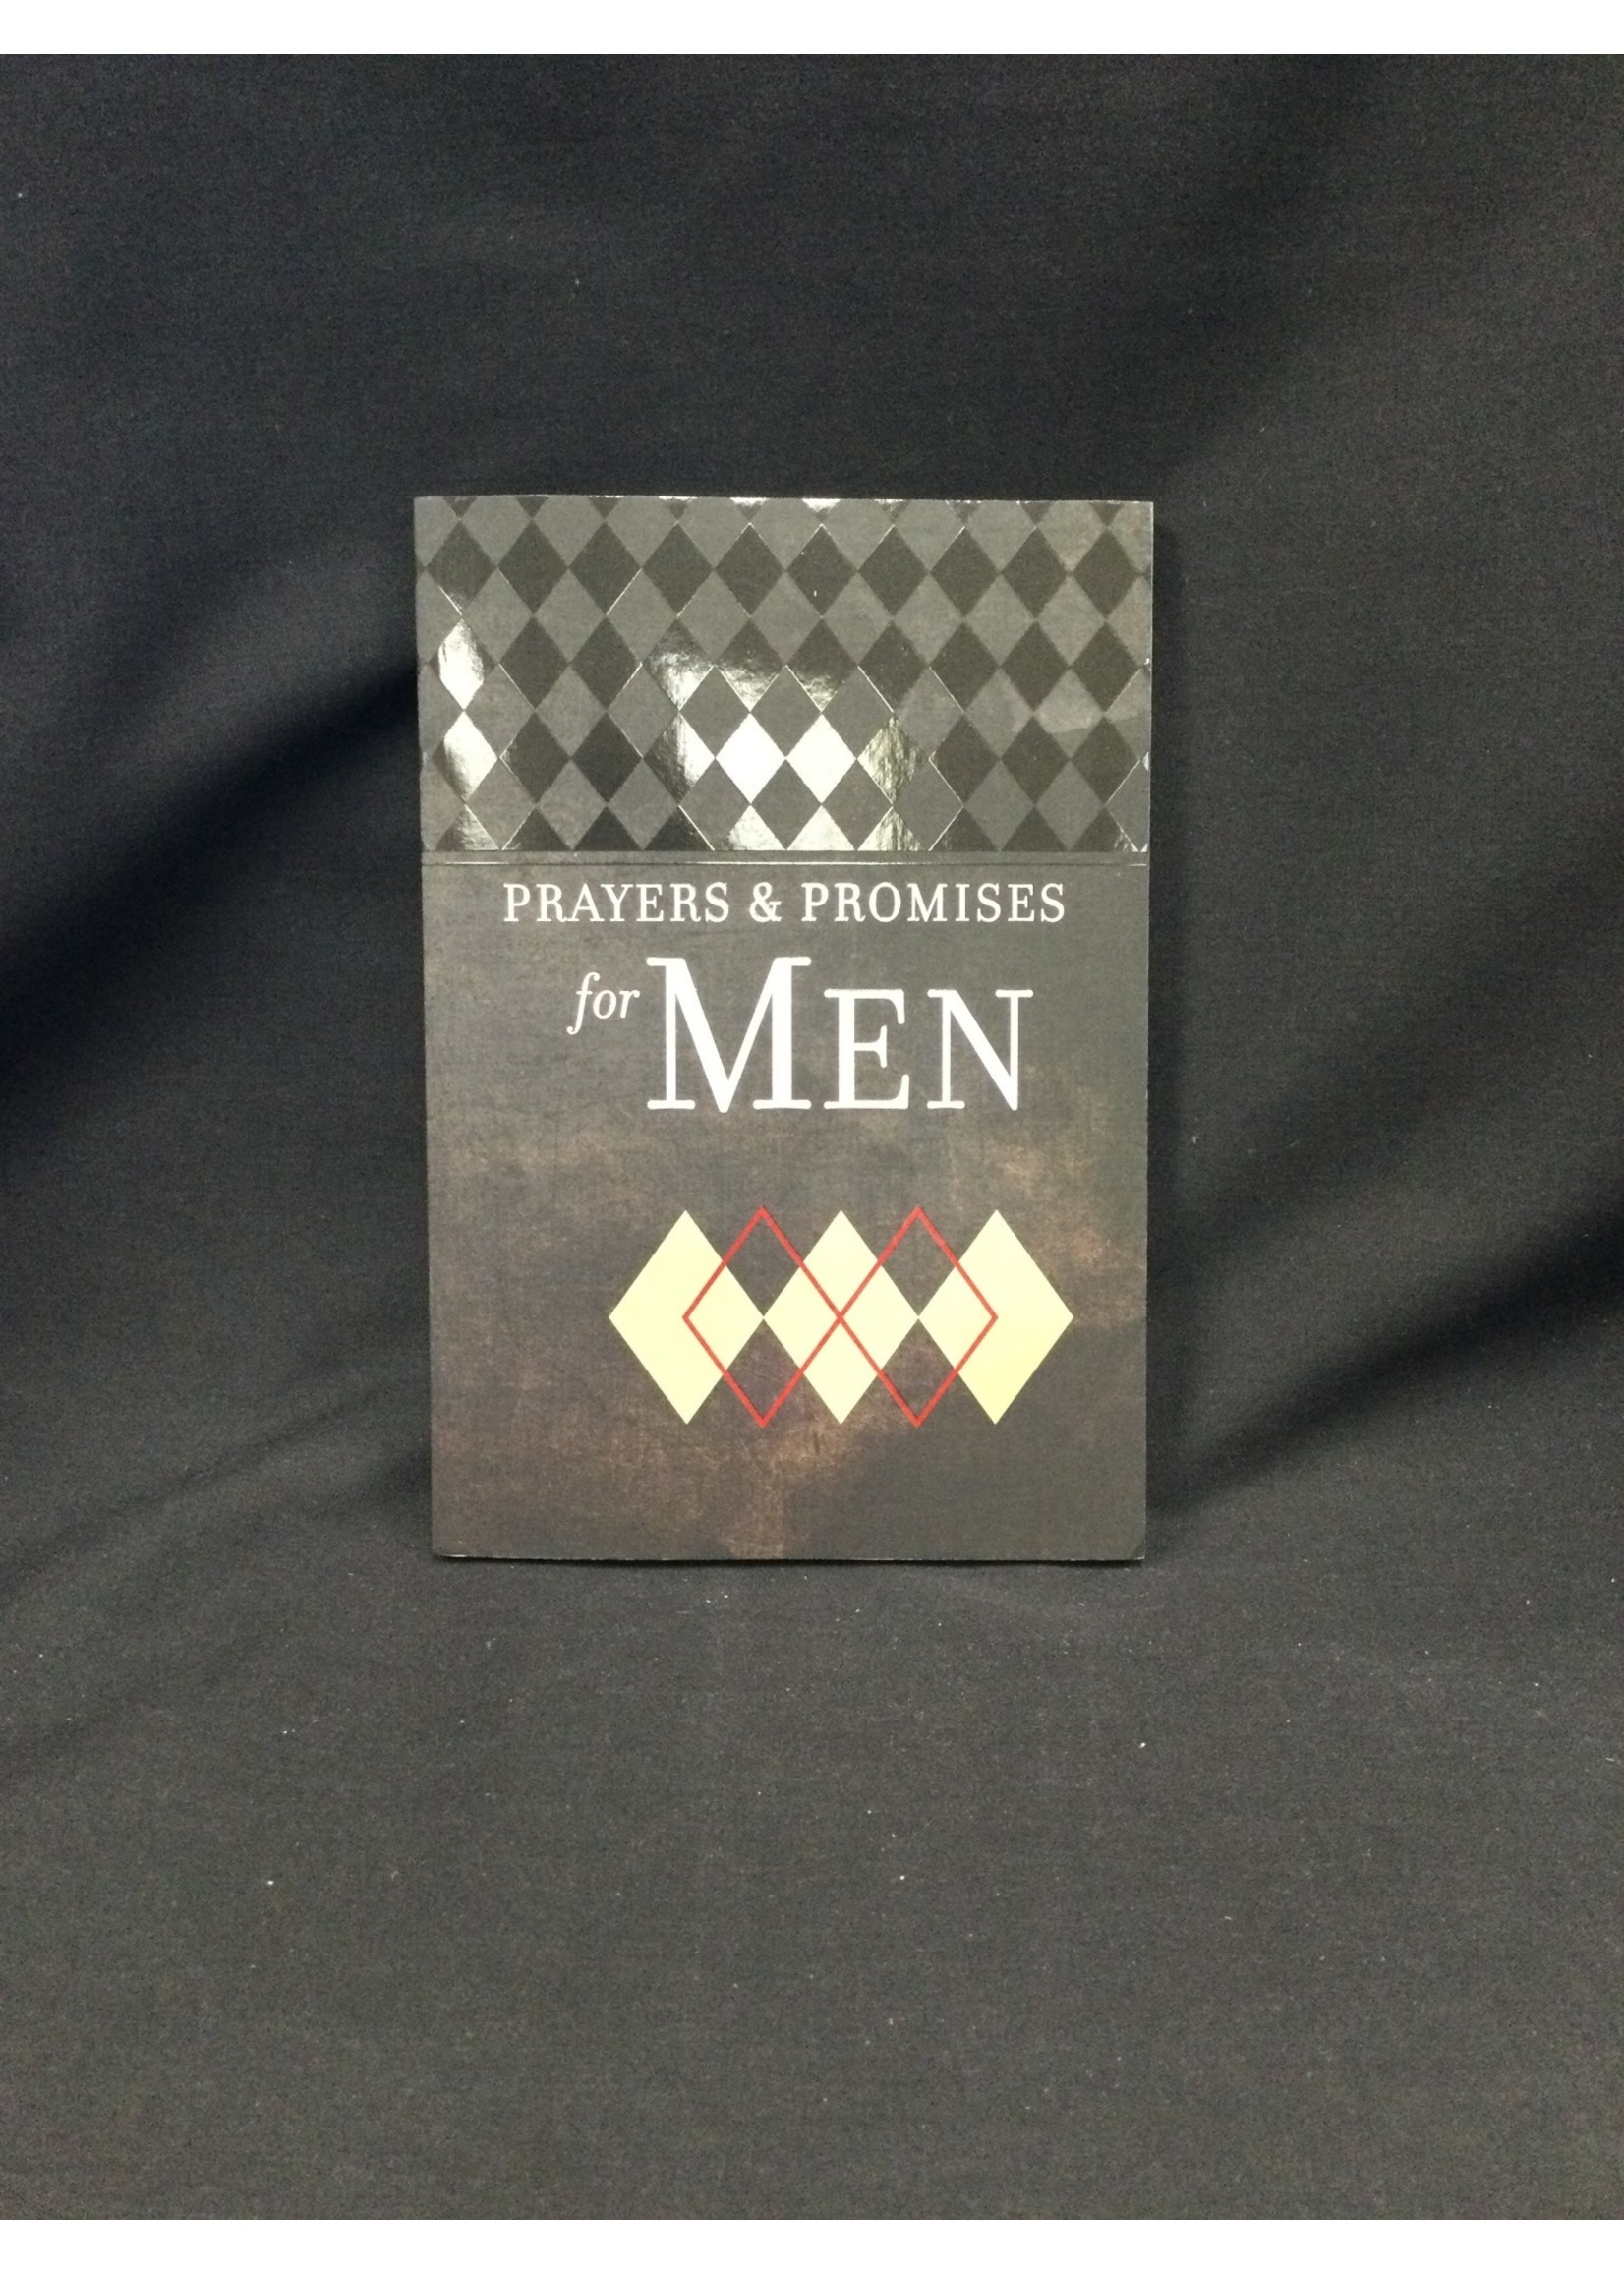 PRAYERS AND PROMISES FOR MEN